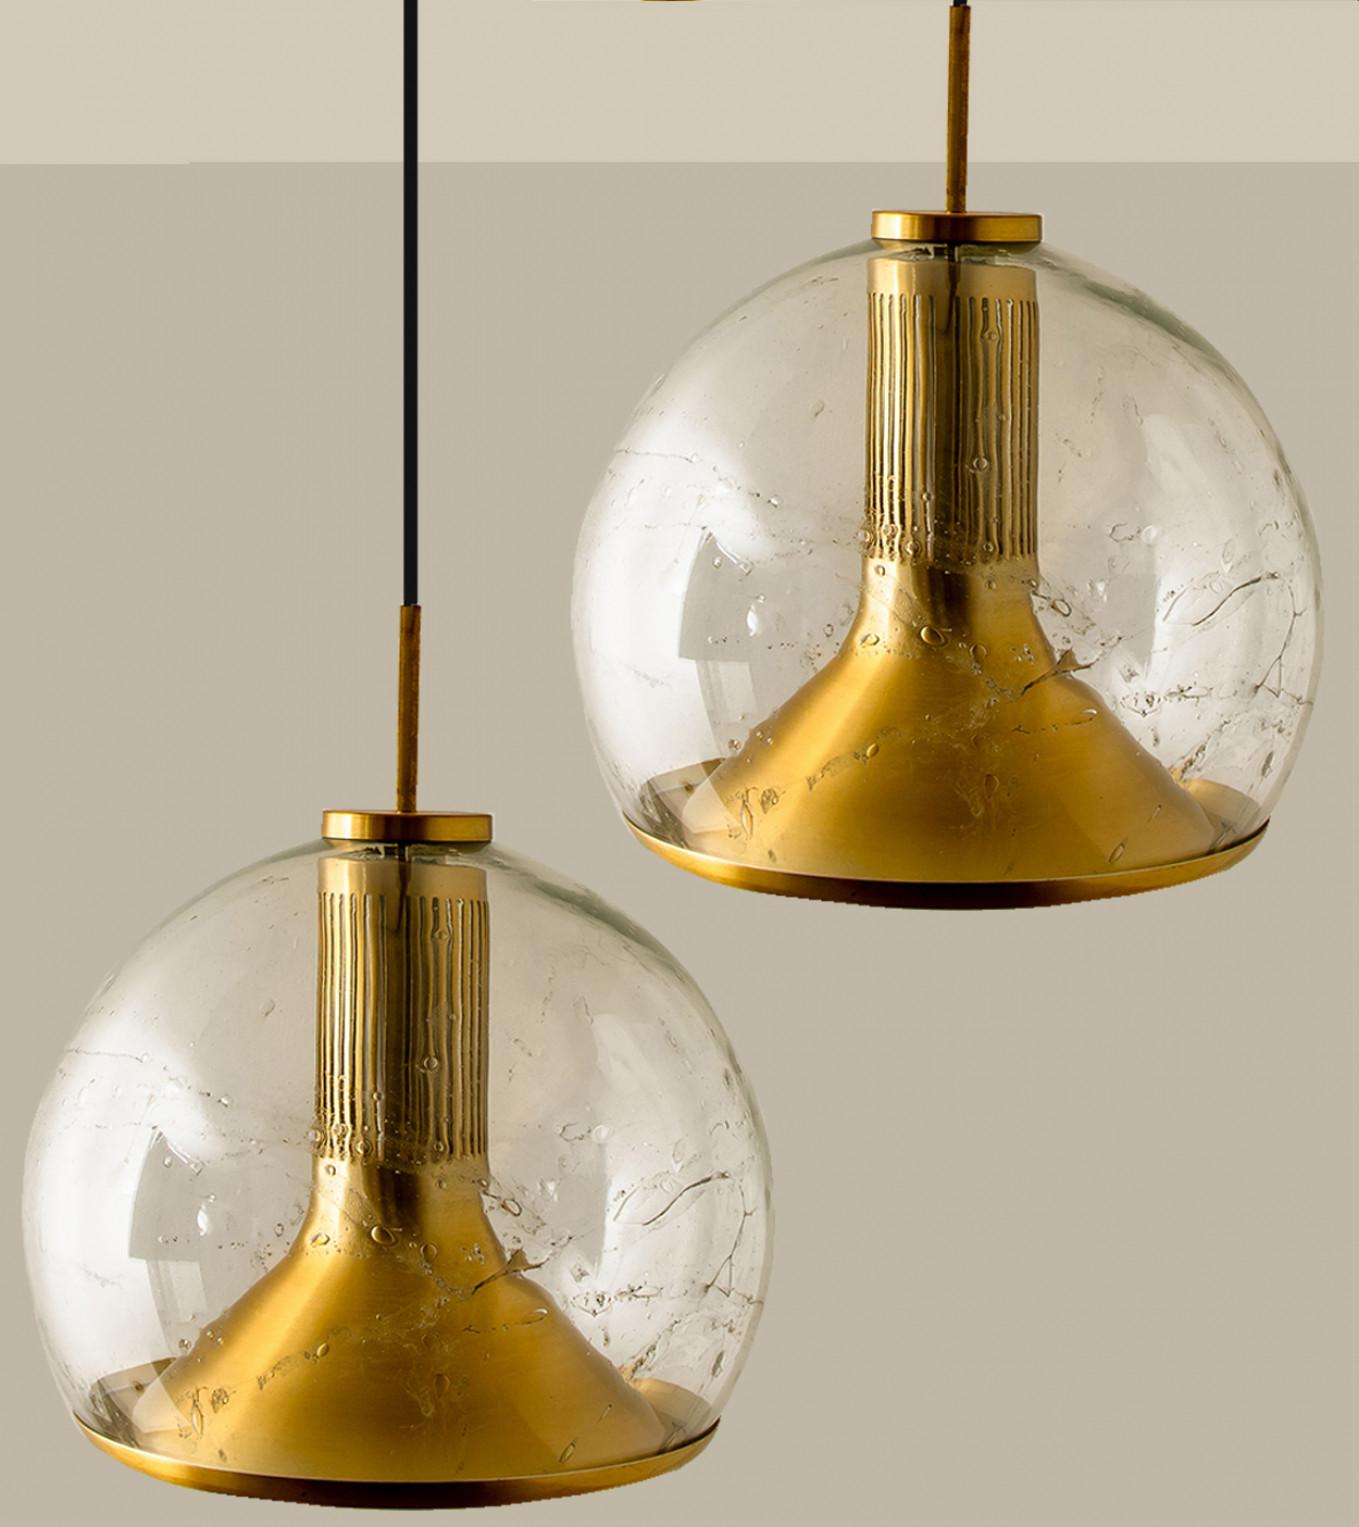 Several Large glass and brass ceiling lights from the 1970s of the factory Doria Leuchten, Germany, Europe. The lamp has a clear glass bulb with a brass fitting. A high quality piece. True craftsmanship of the 20th century.

The timeless elegance of